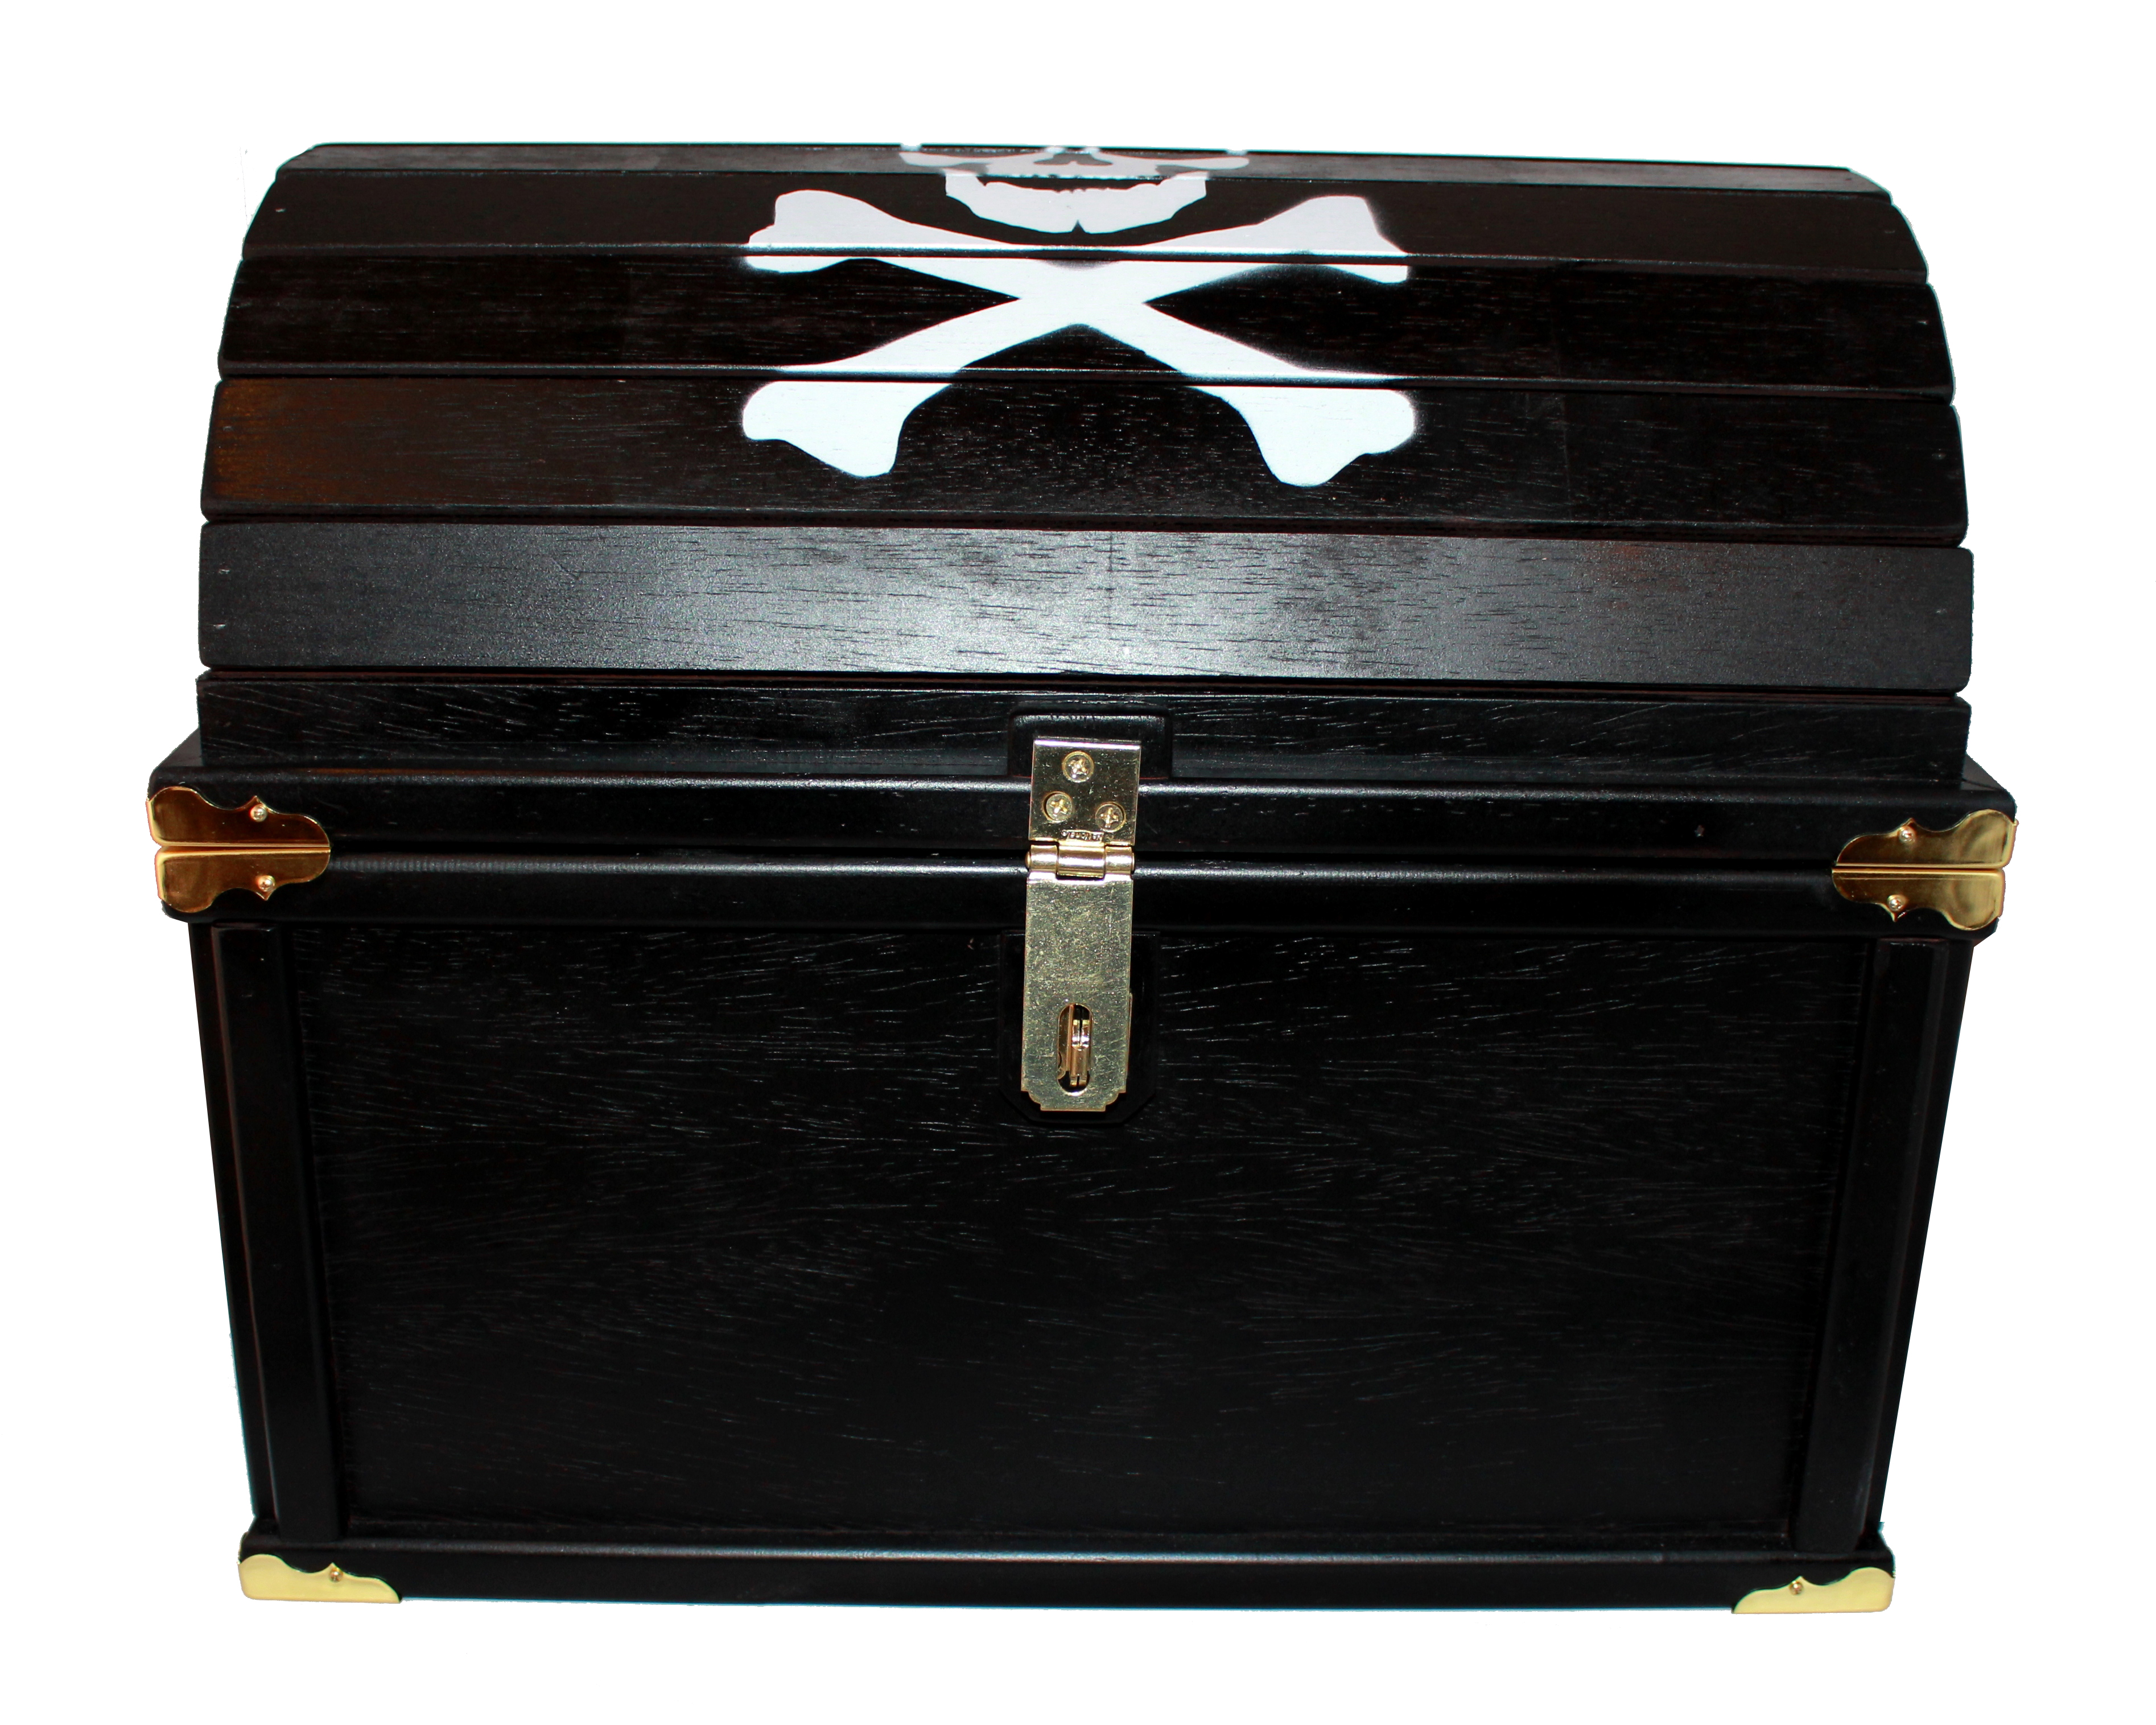 pirate toy chest